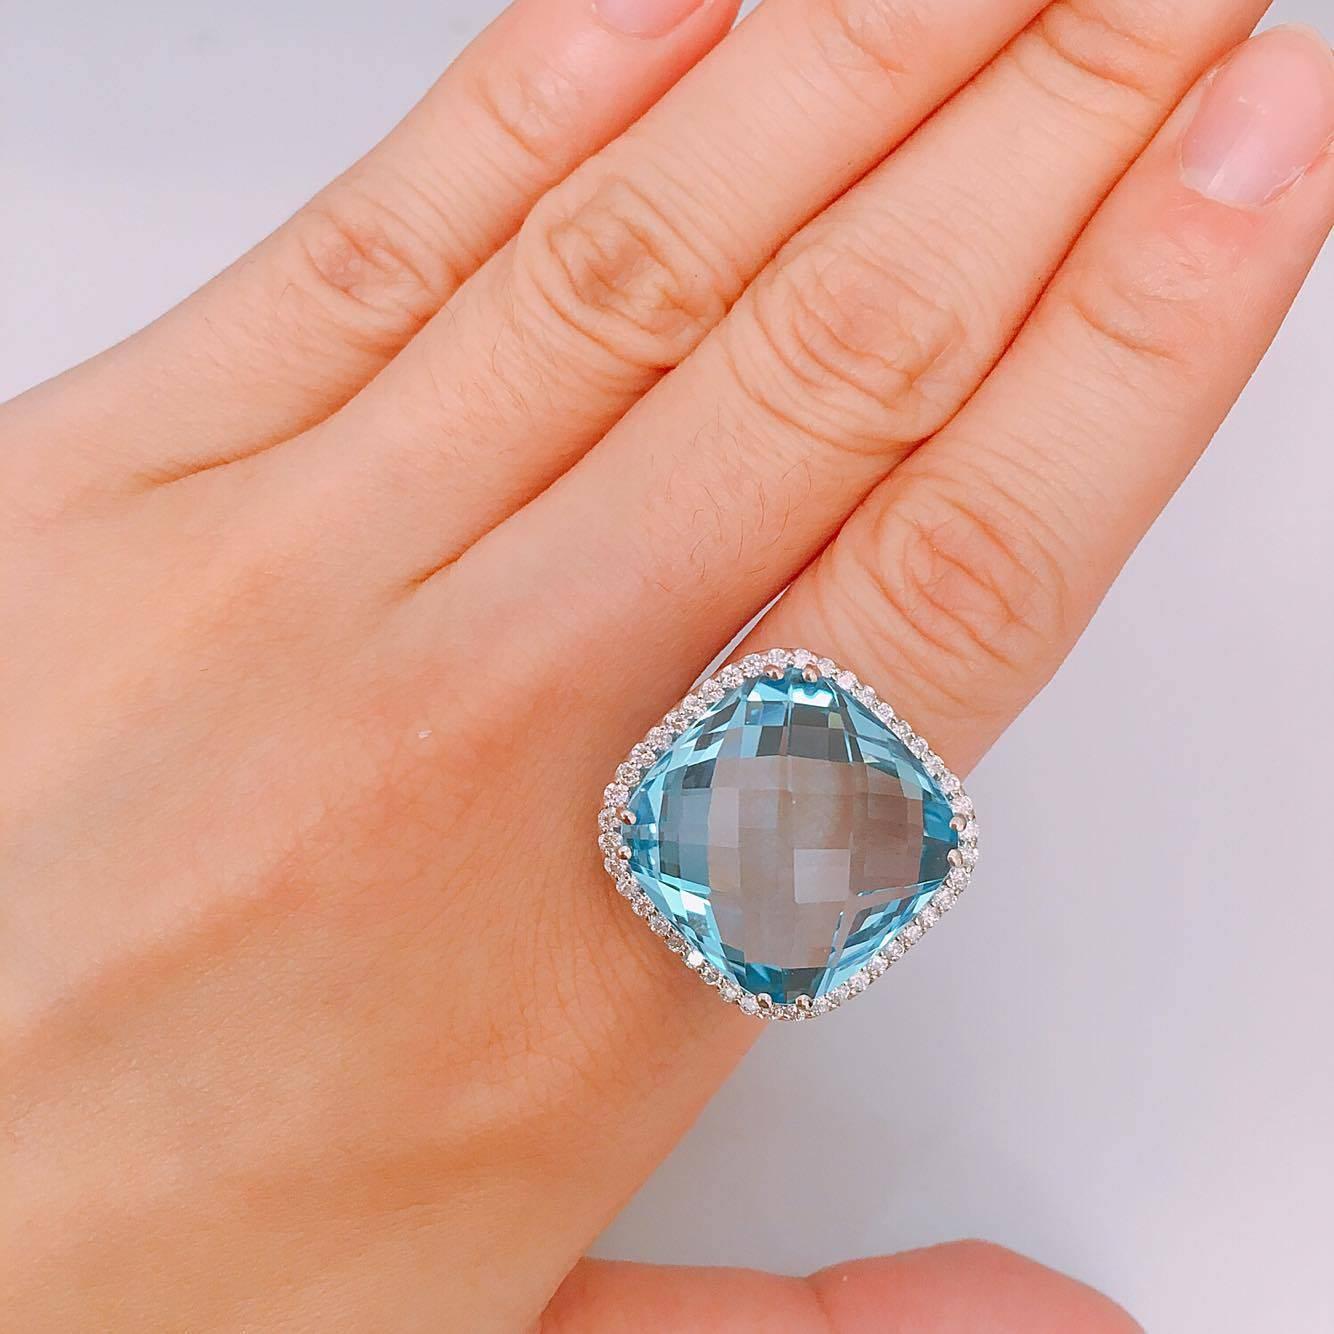 28.00ct Blue Topaz Center
1.00ct t.w. Diamond VVs Clarity F color conflict free diamonds. If you prefer this piece in all white/yellow/rose gold and blackened gold, you can order it that way as well. 
All finger sizes available at no additional